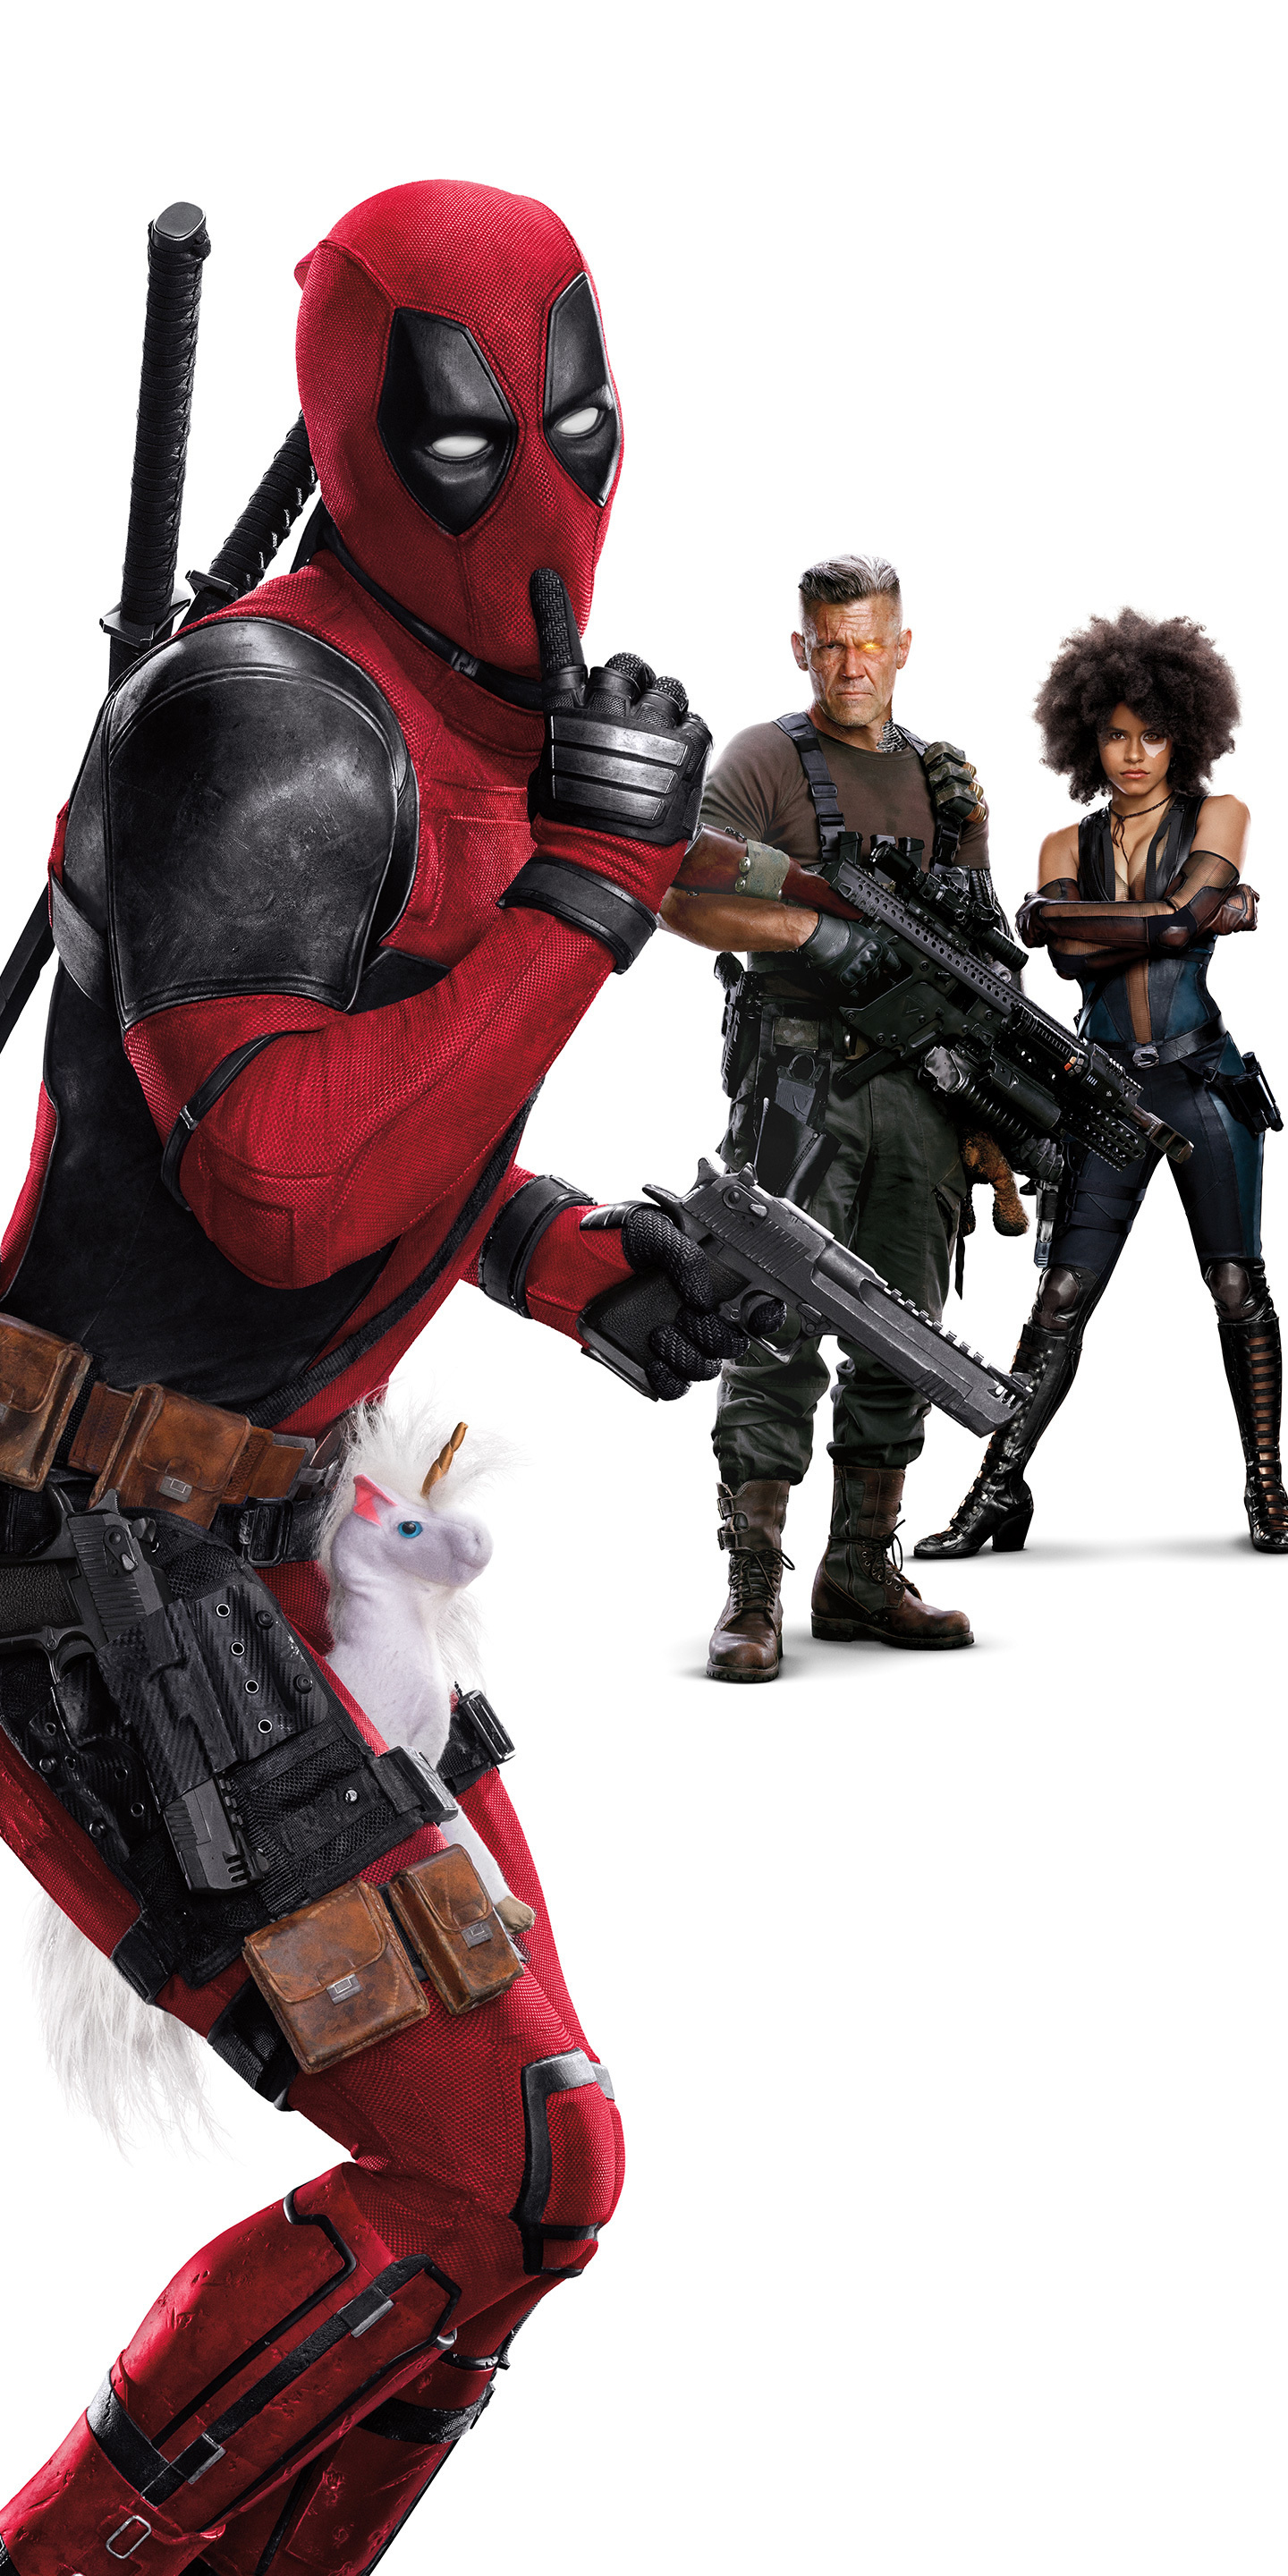 Ryan Gosling as deadpool, handsome face, unmasked, no | Stable Diffusion